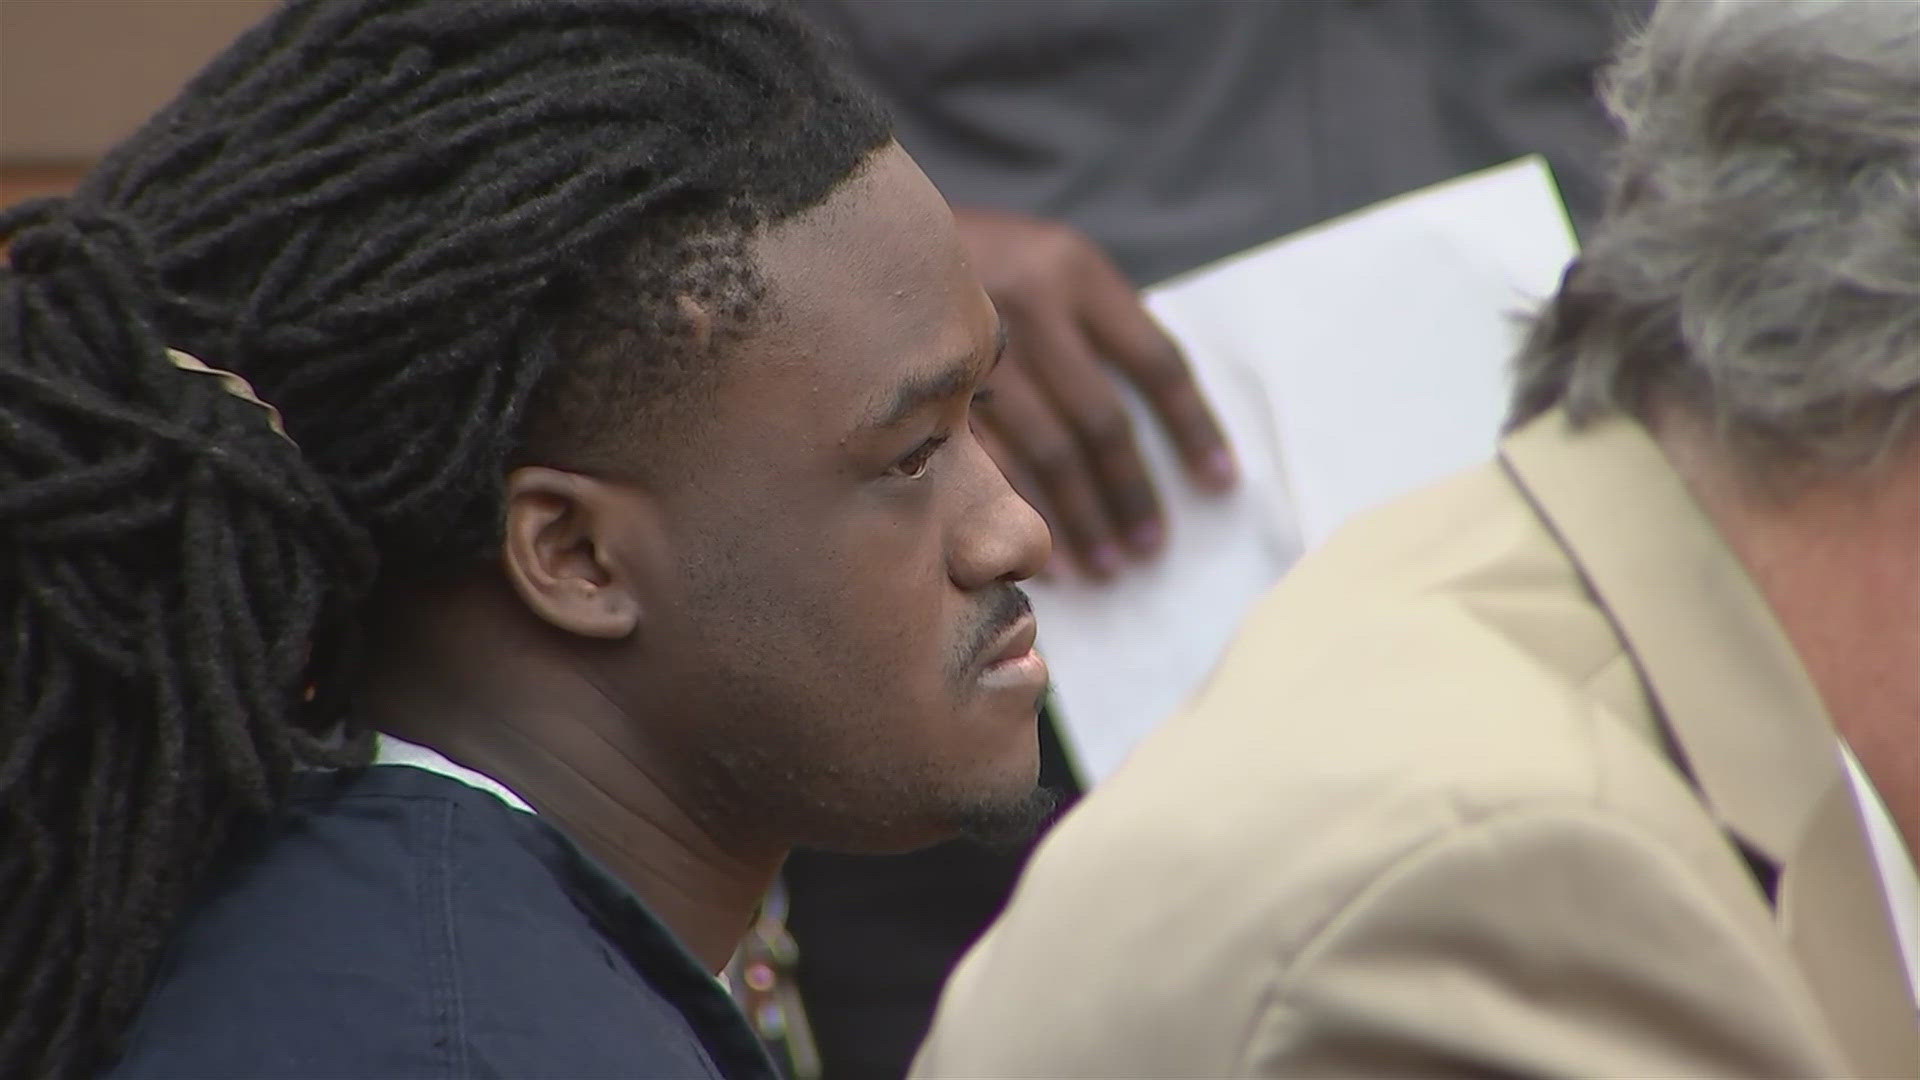 Bond was denied for Karanji Reese who accused of killing two and injuring four others in the May 12 shooting.